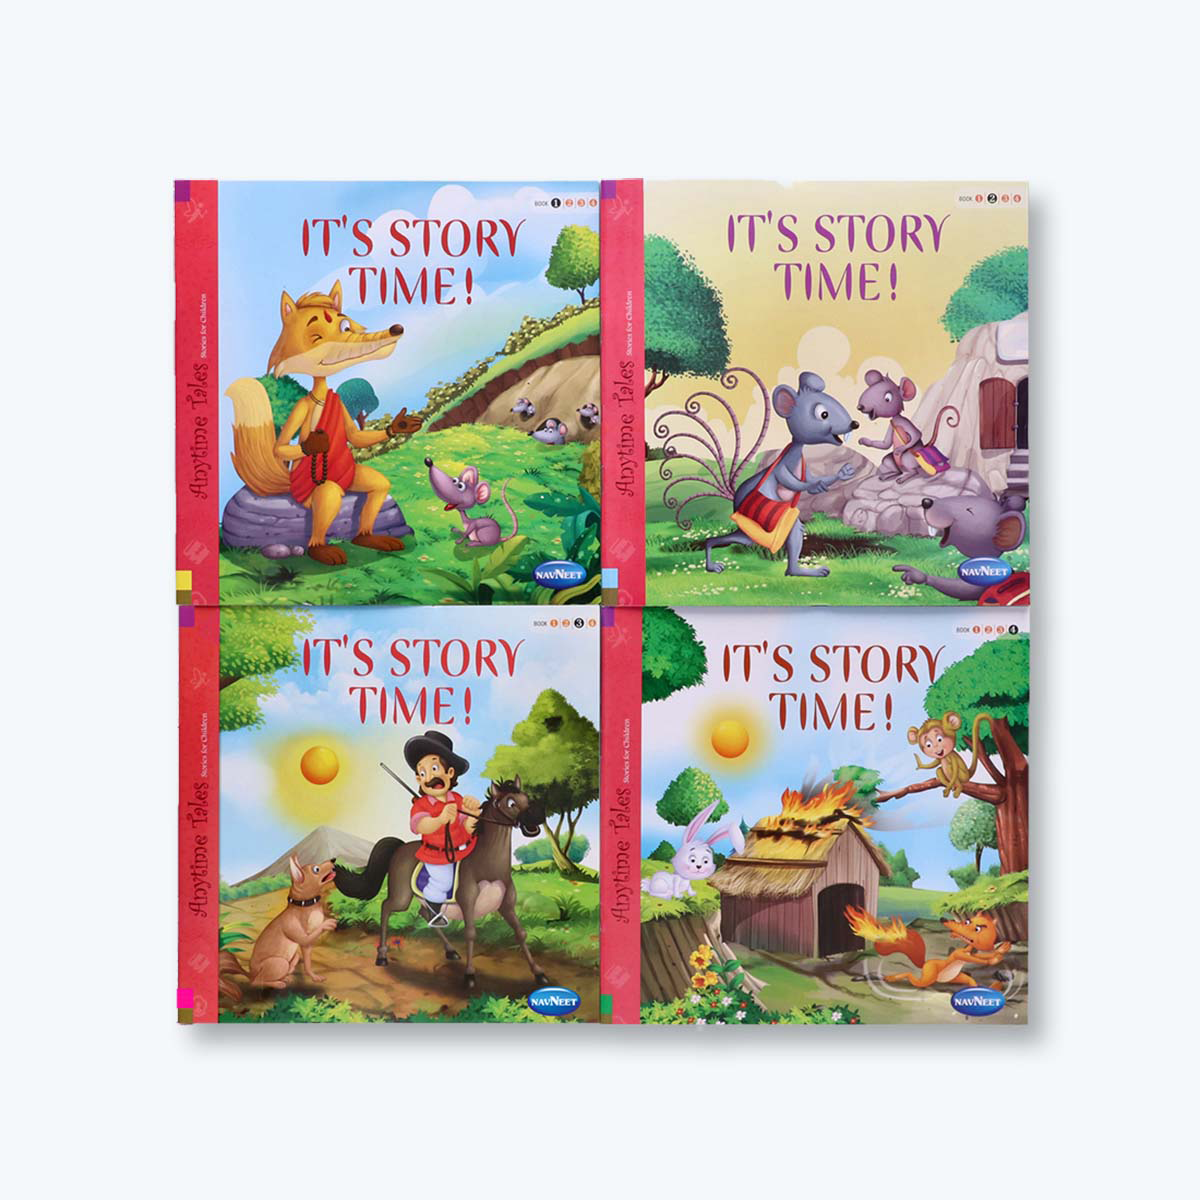 Navneet It's Story Time (Story Books) 1 to 4- Best for building lifetime bond with reading- With Colourful Illustrations- Read aloud stories for kids- Best Library Book Collection